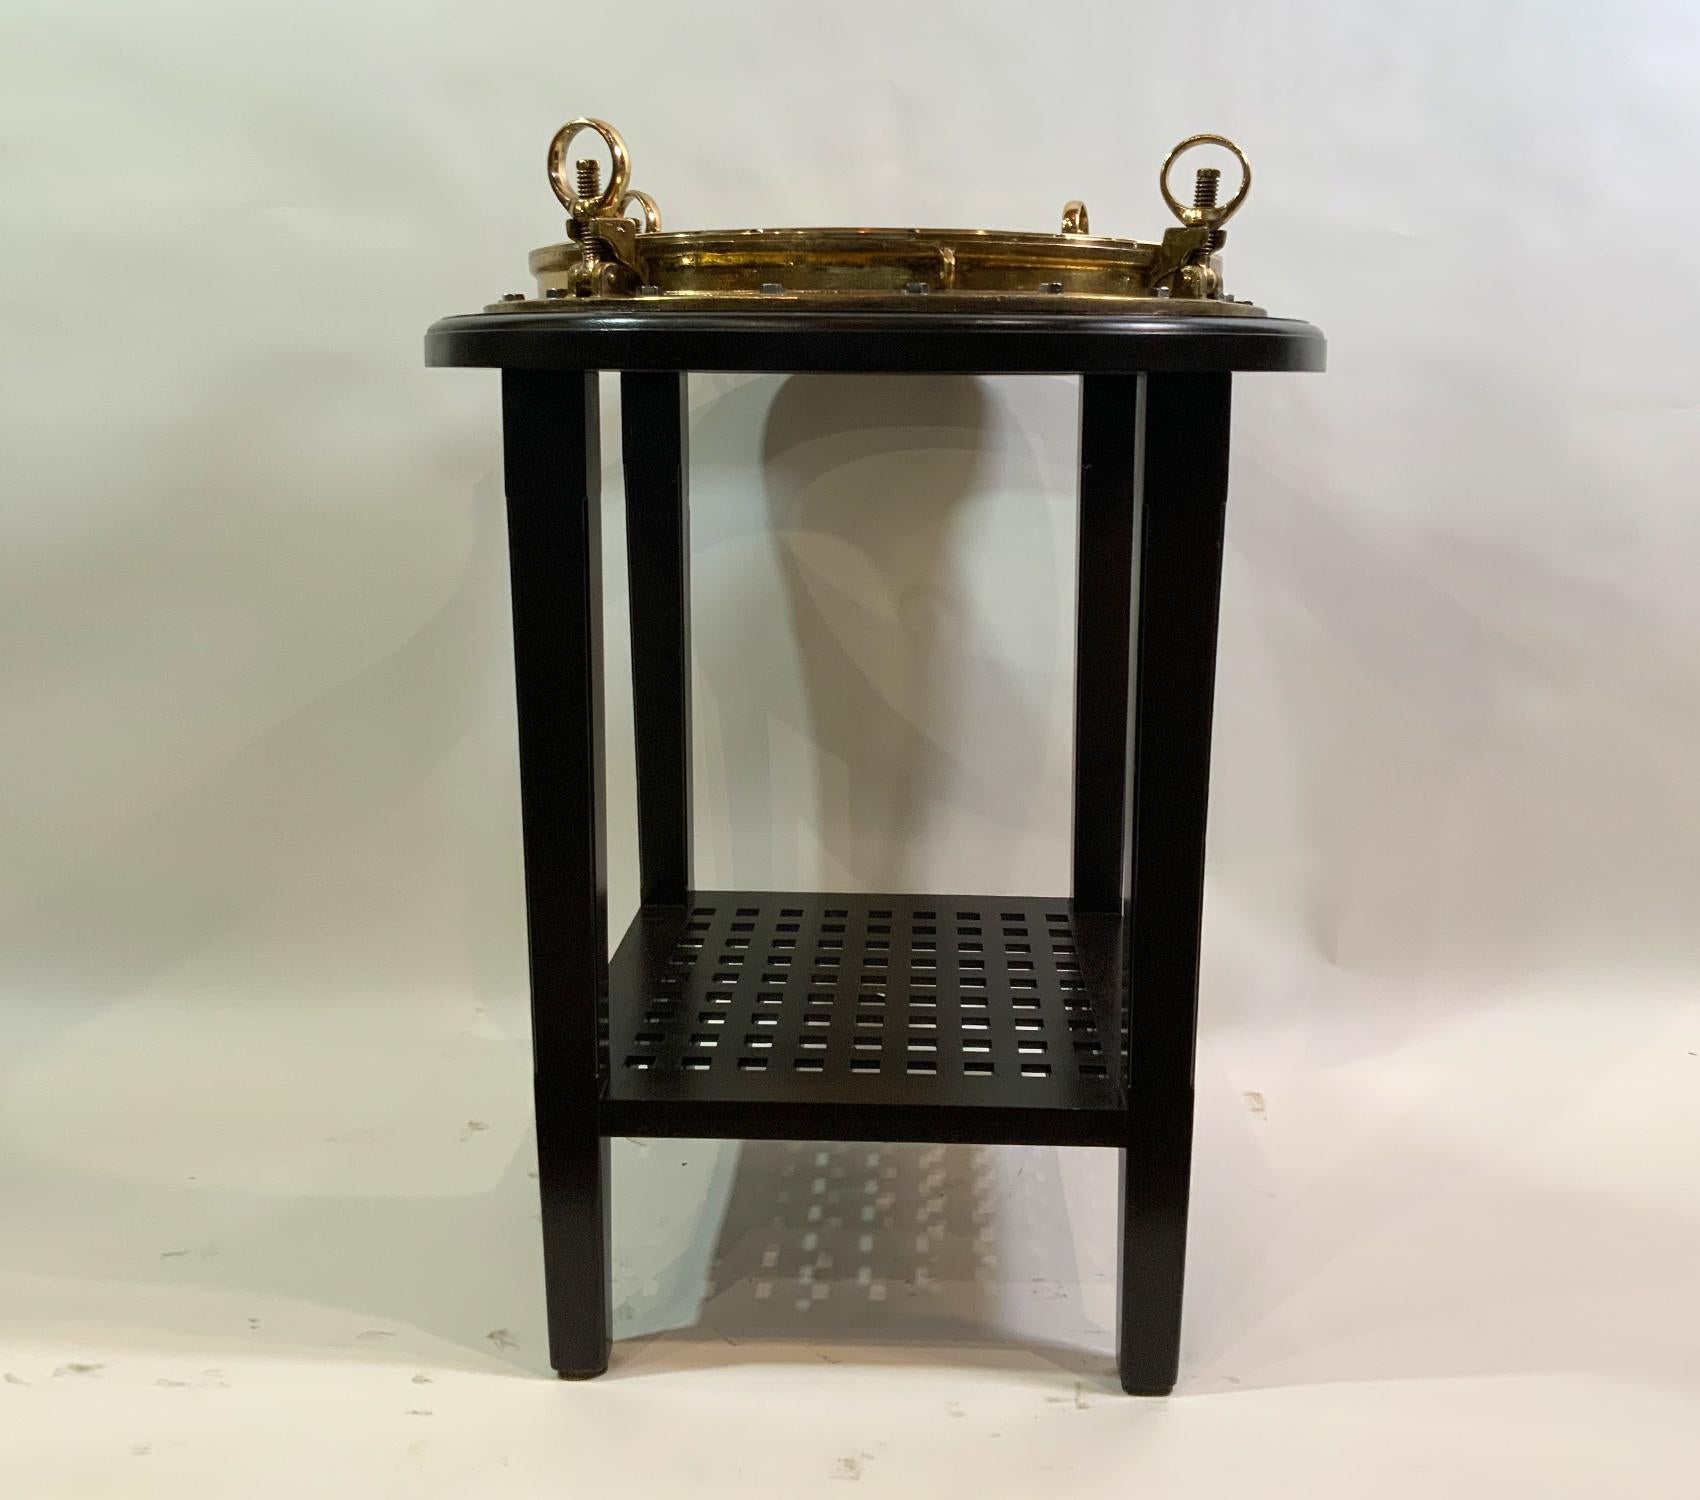 Ships porthole of enormous size converted to a bar height bistro table that will fit four stools. Three feet overall diameter. Custom mahogany table with ships grating shelf. This is a statement piece.

Weight: 117 LBS
Overall dimensions: 39” H x